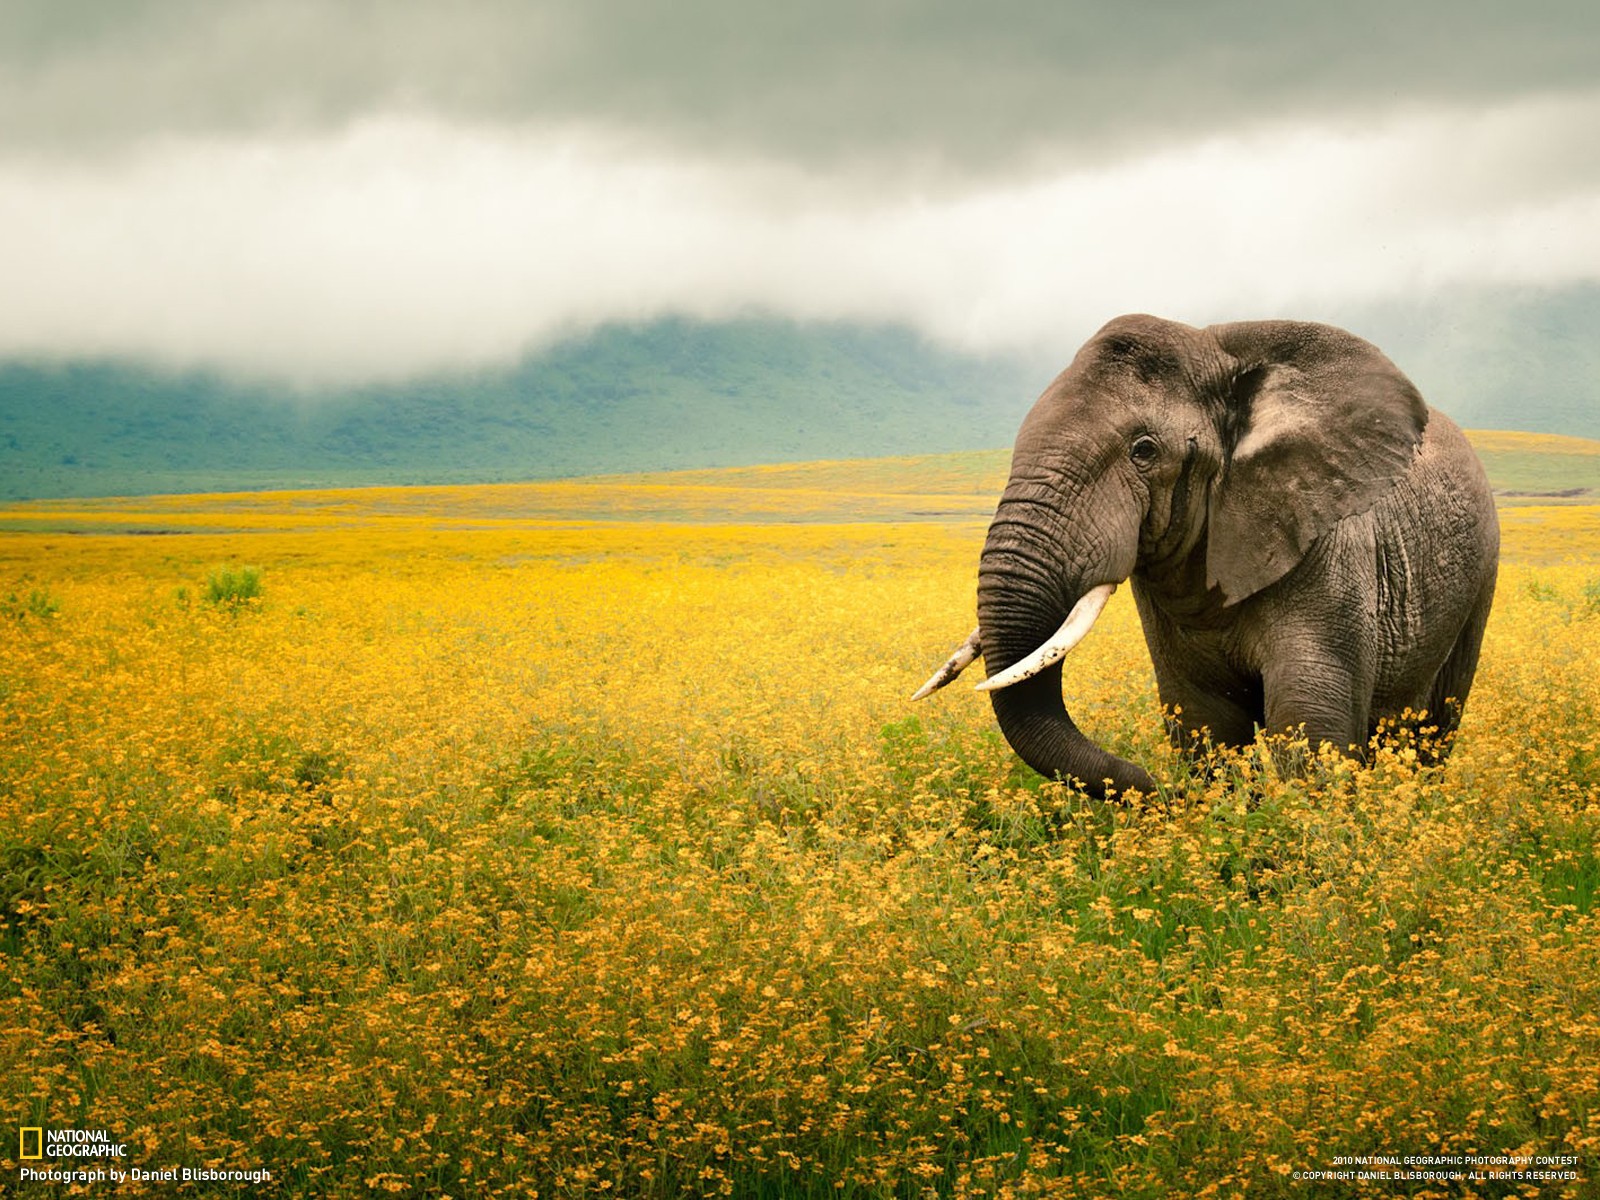 General 1600x1200 elephant animals National Geographic mammals 2010 (Year) field flowers plants